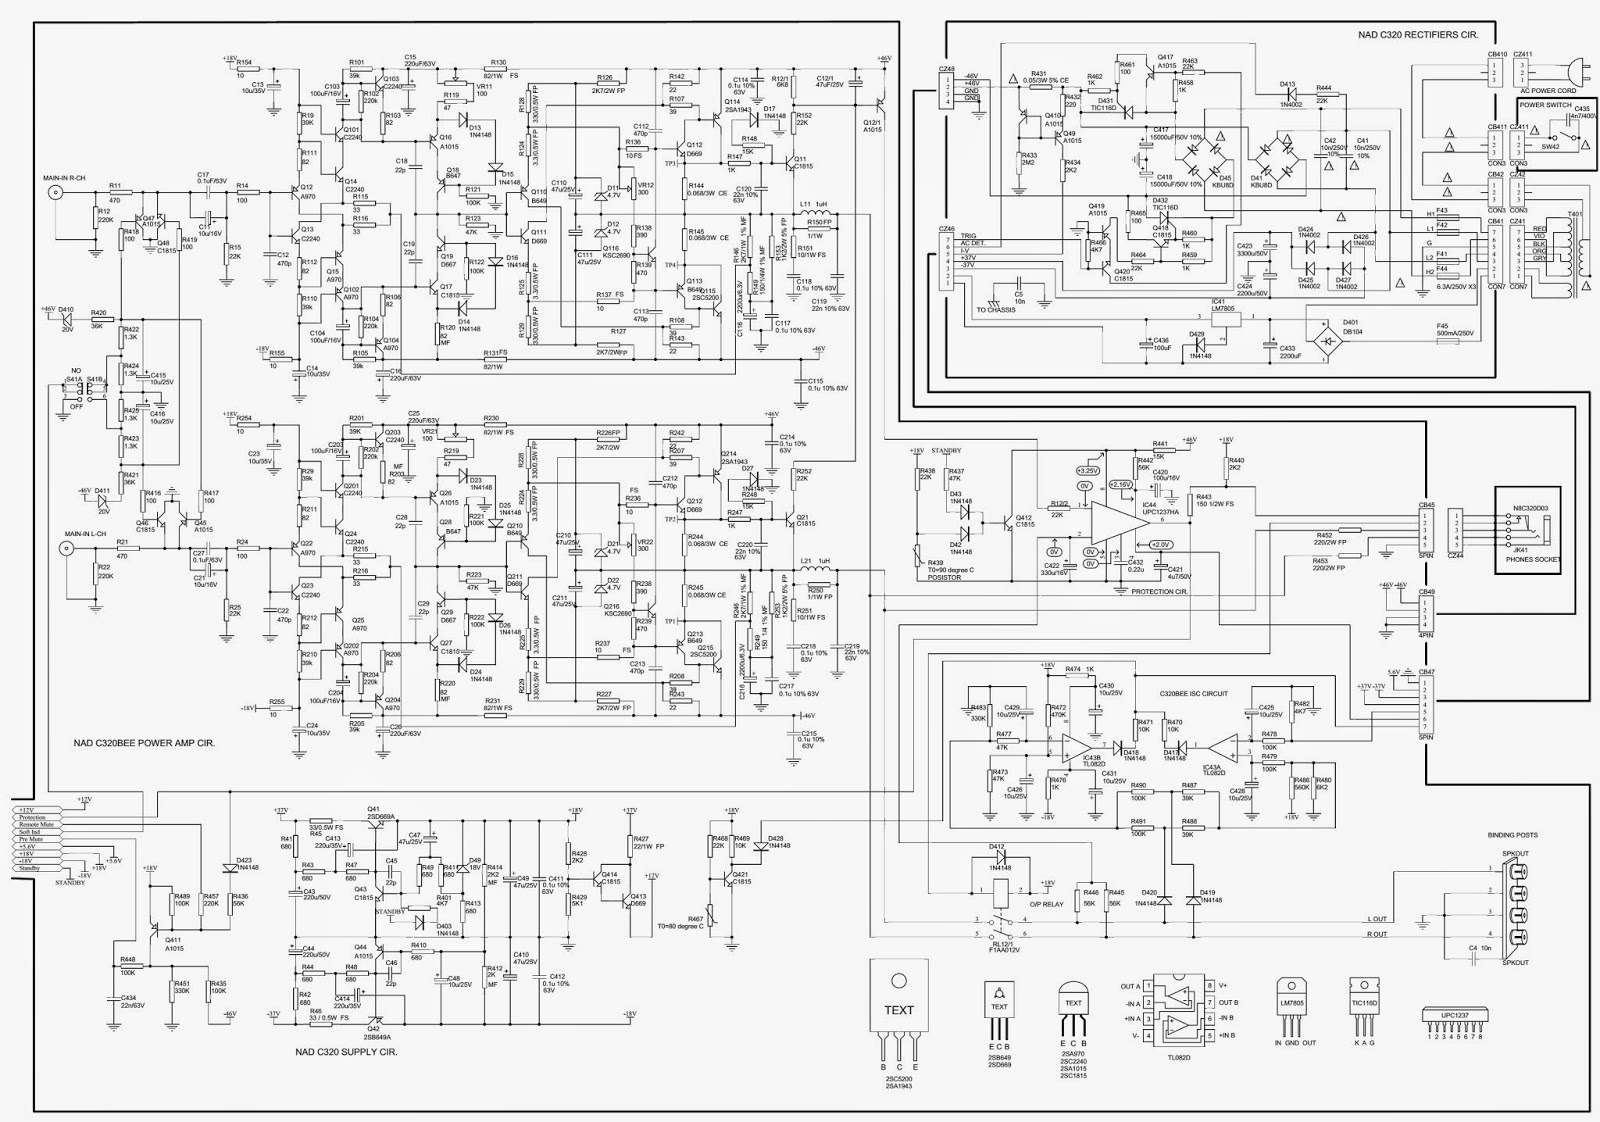 Electro help: NAD C-320 - POWER AMP SCHEMATIC (Circuit Diagram) - STEREO AMPLIFIER - [2SC5200 ...